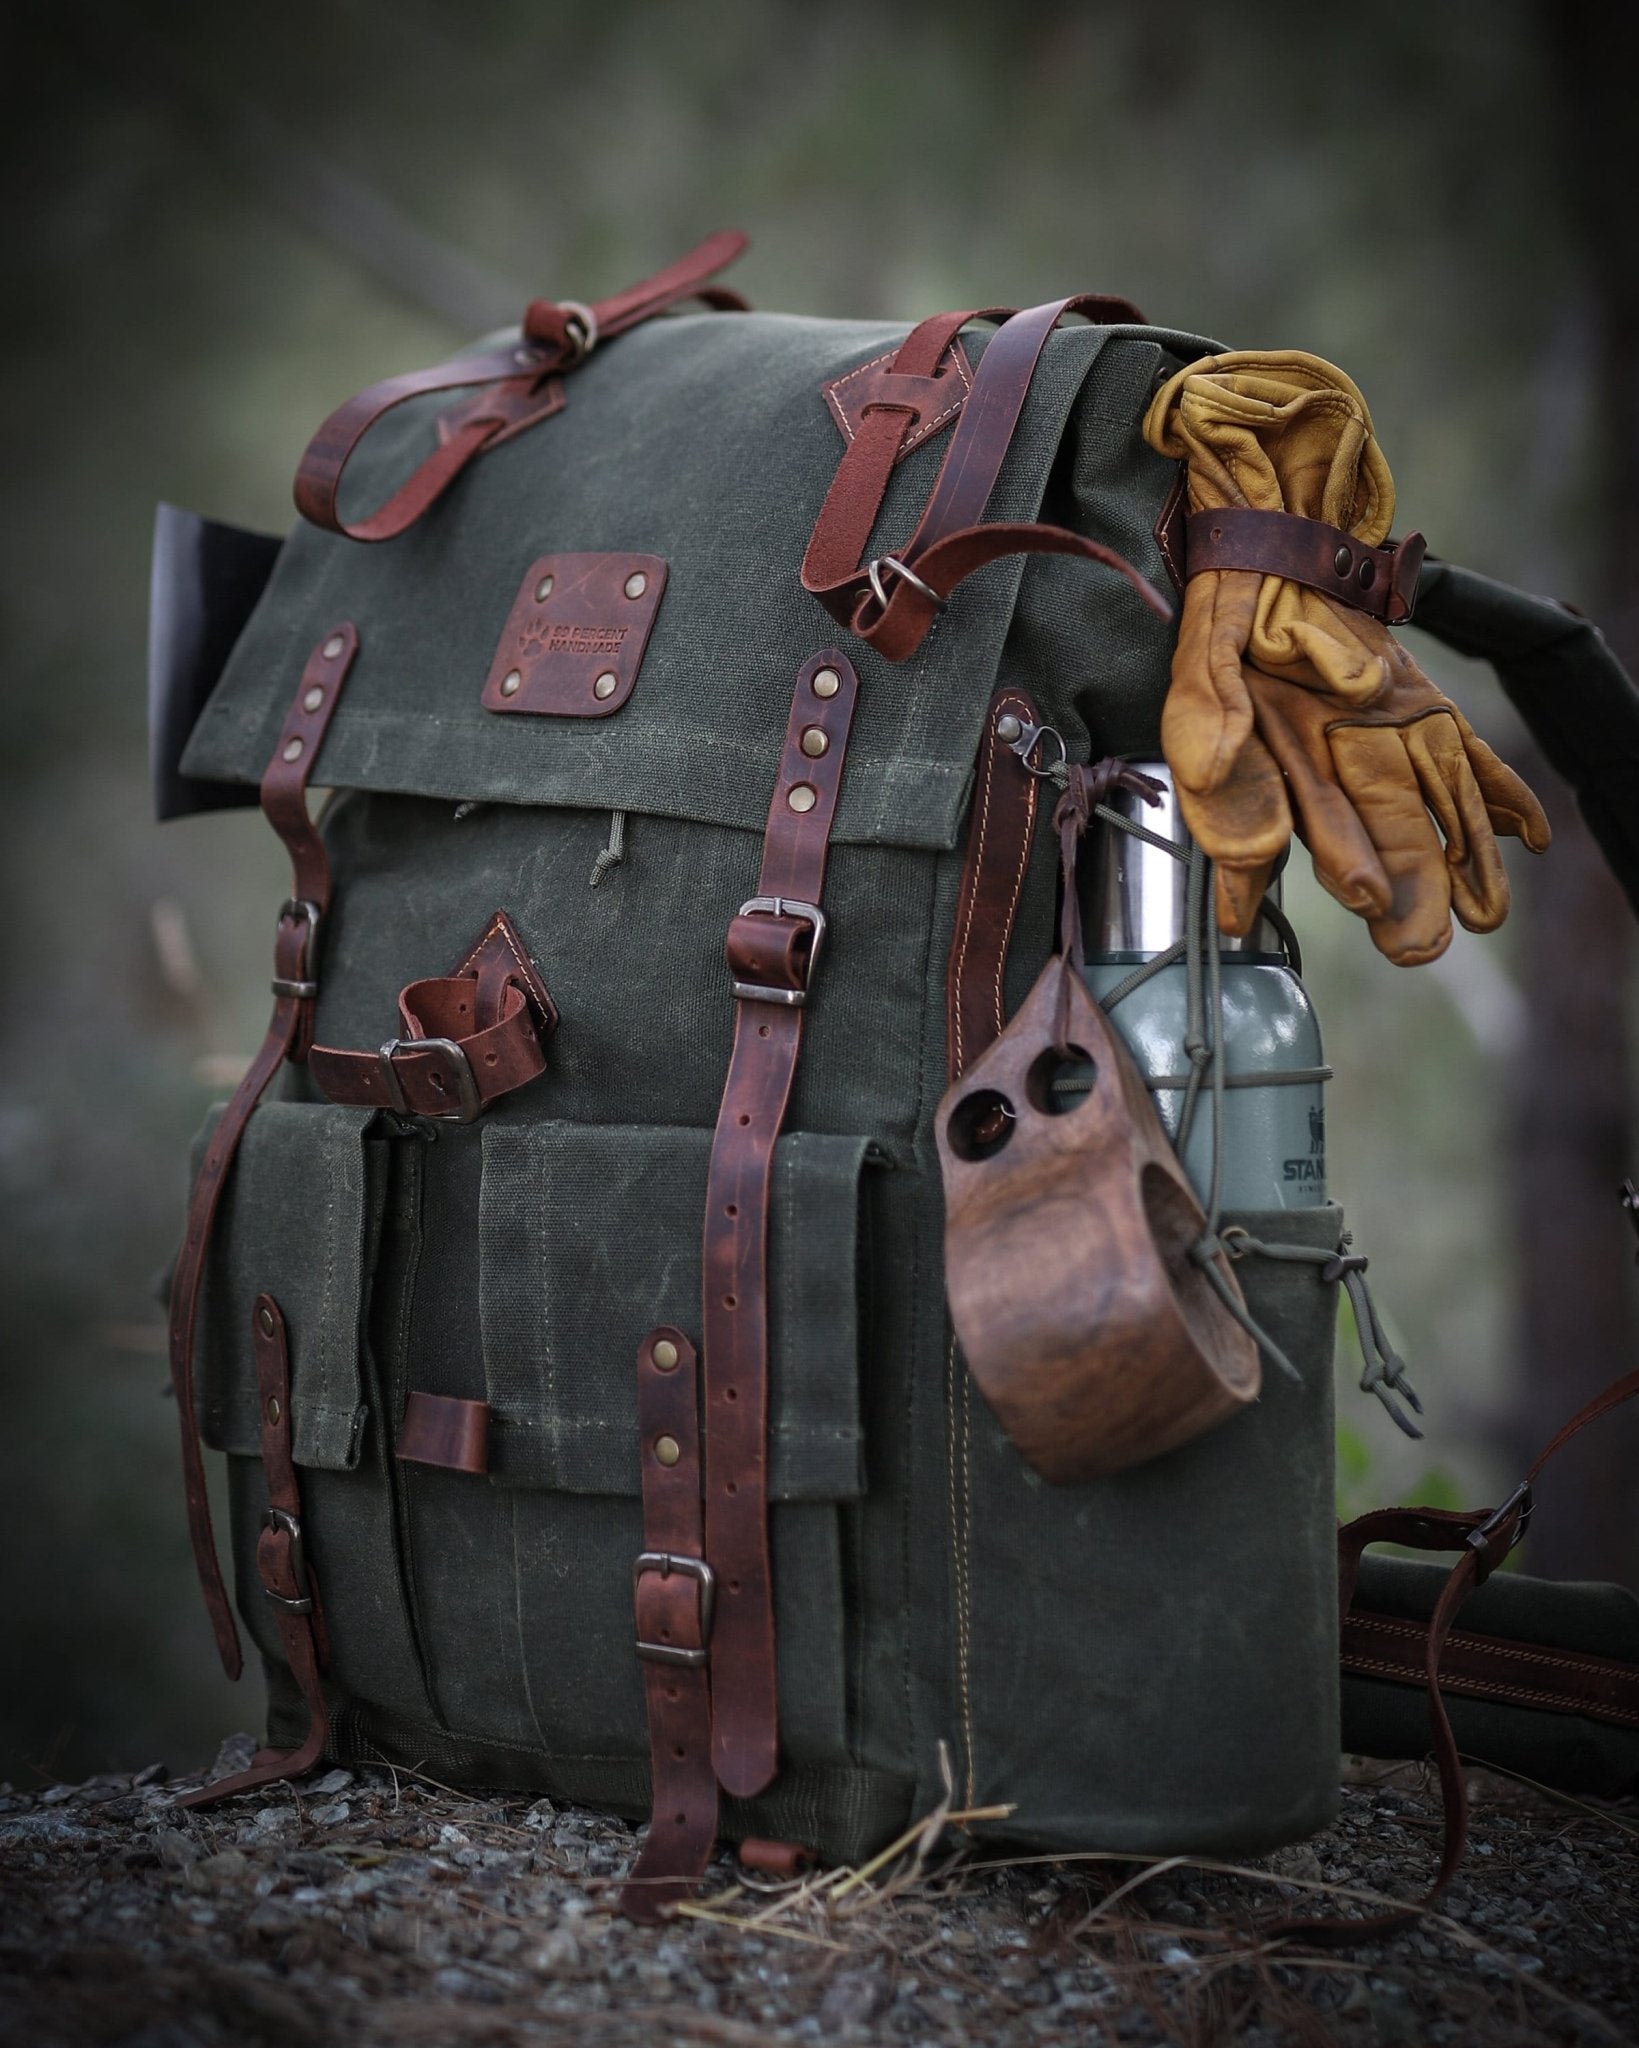 80 L | Bushcraft Backpack | Camping Backack | Green, Brown, Dhaki Colours | Handmade Leather, Canvas Backpack for Travel, Camping, Bushcraft  99percenthandmade   